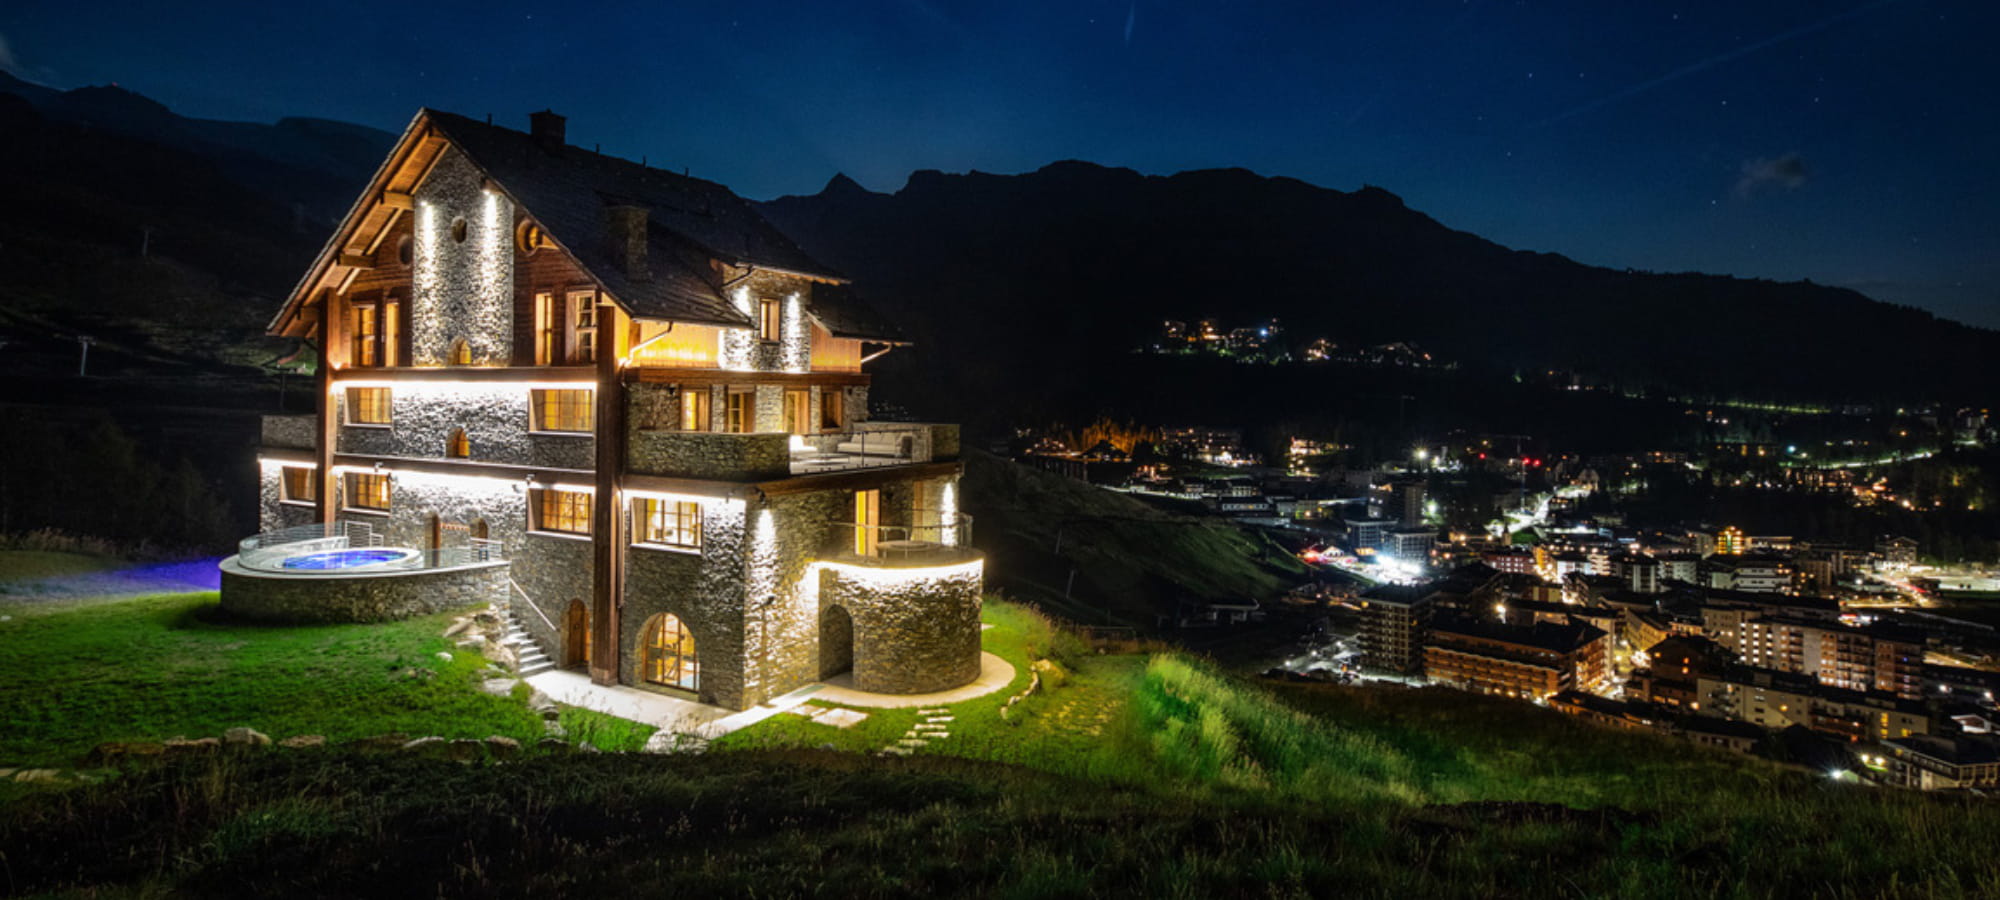 Accommodation in Breuil-Cervinia